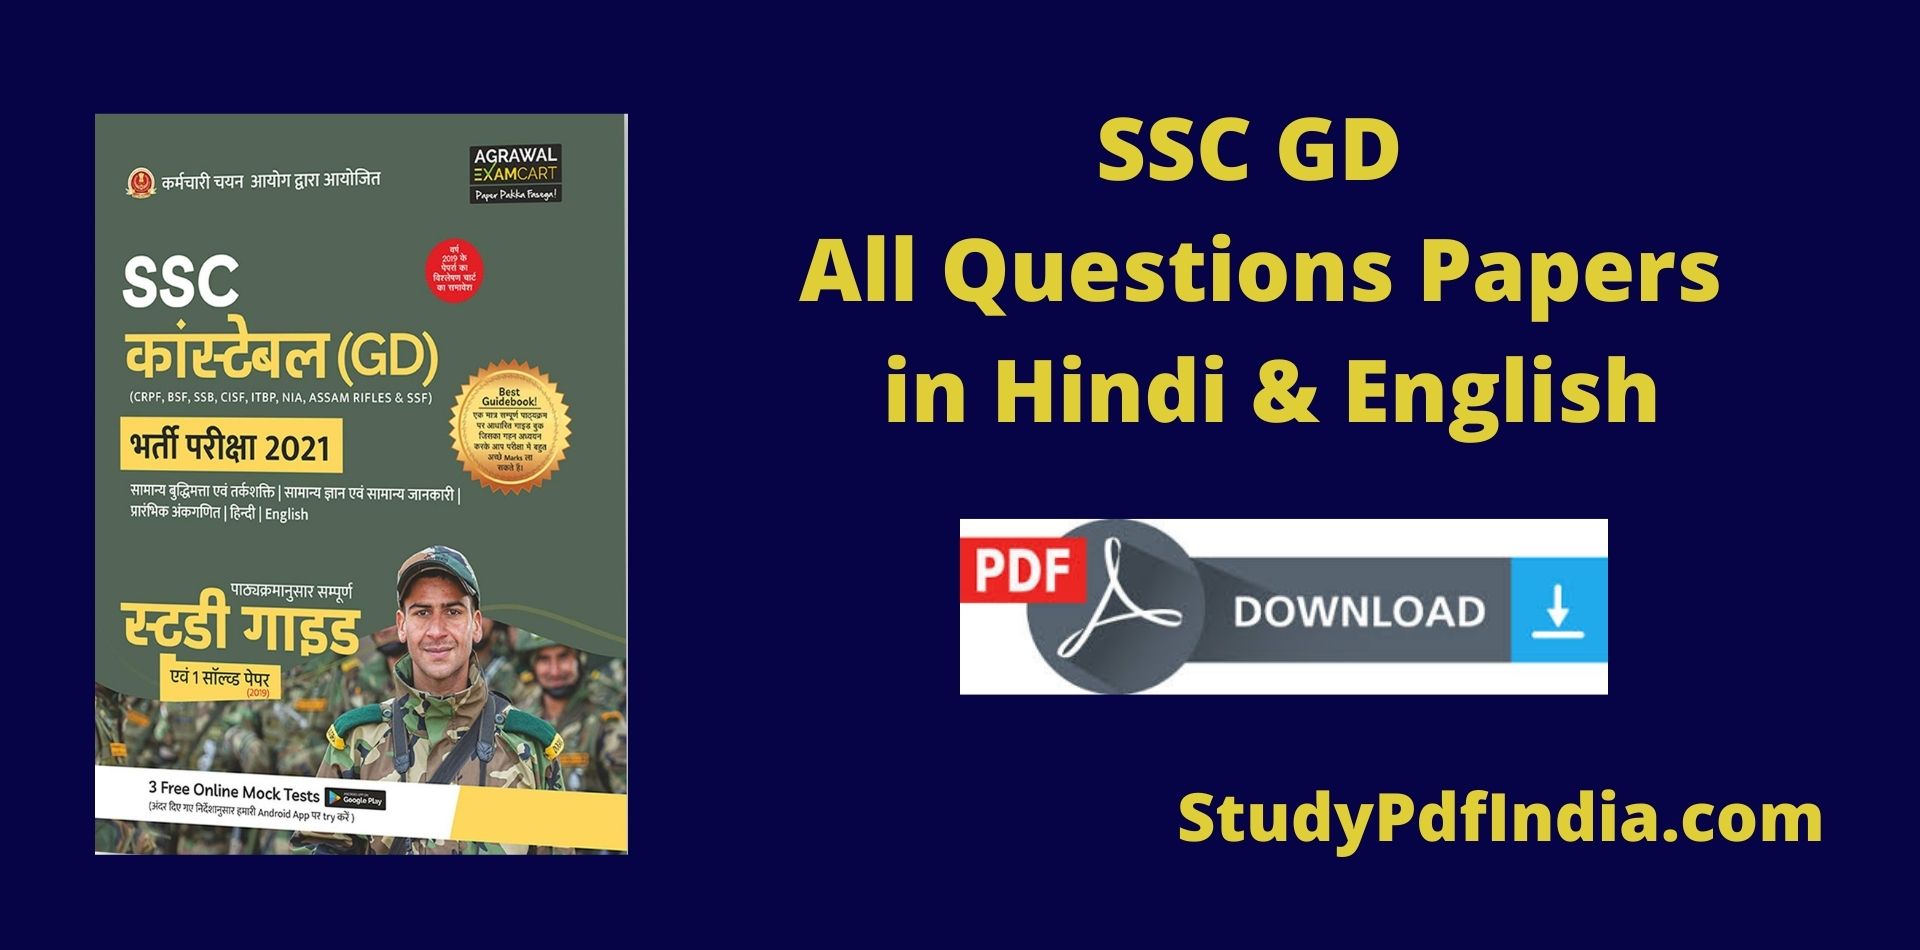 SSC GD All Questions Papers PDF Download in Hindi & English